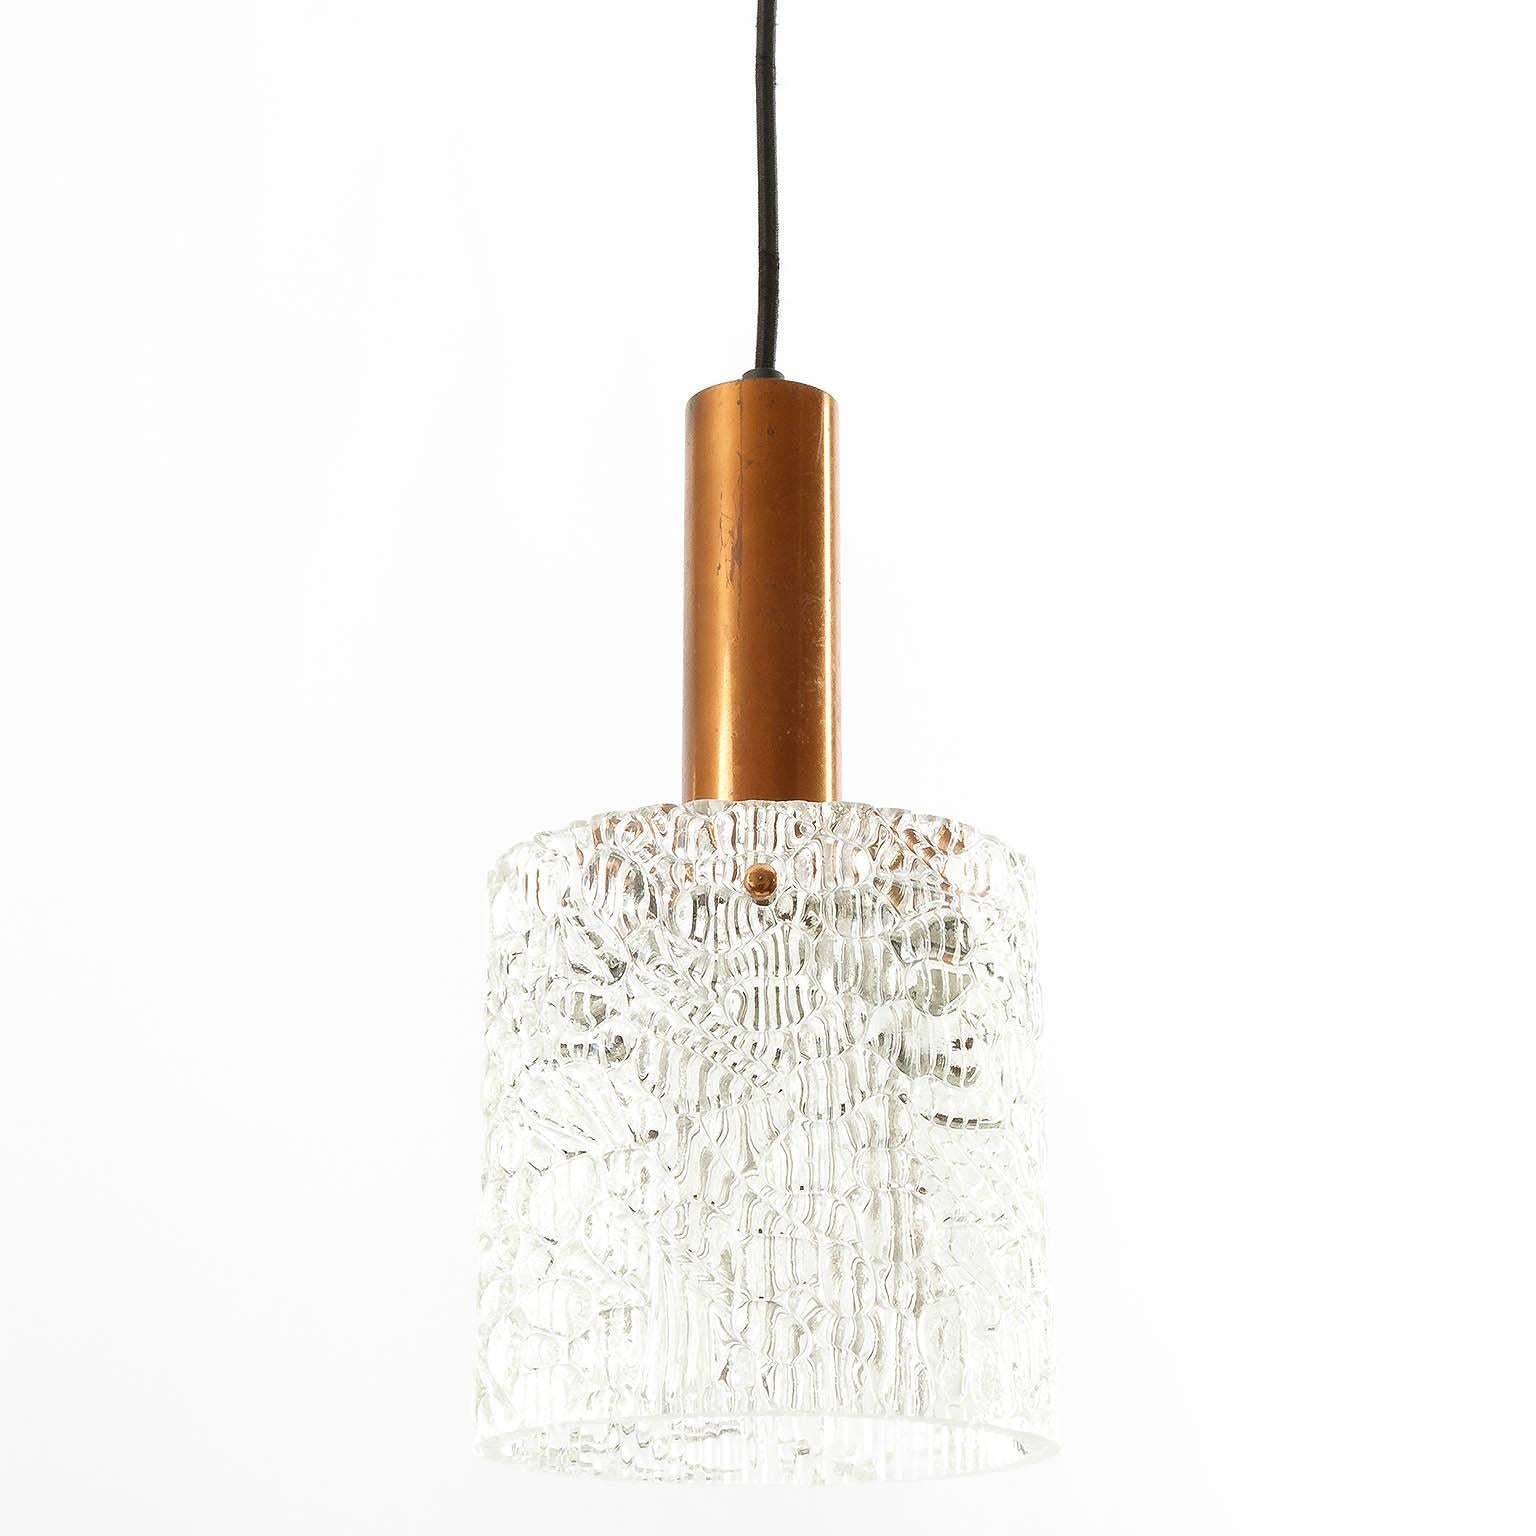 One of six pendant lights by Kalmar, Austria, manufactured in the 1950s. A textured glass zylinder is hold by a natural patinated mounting fixture. The glasses are in excellent condition, partially strong patina on copper. Copper can be repolished